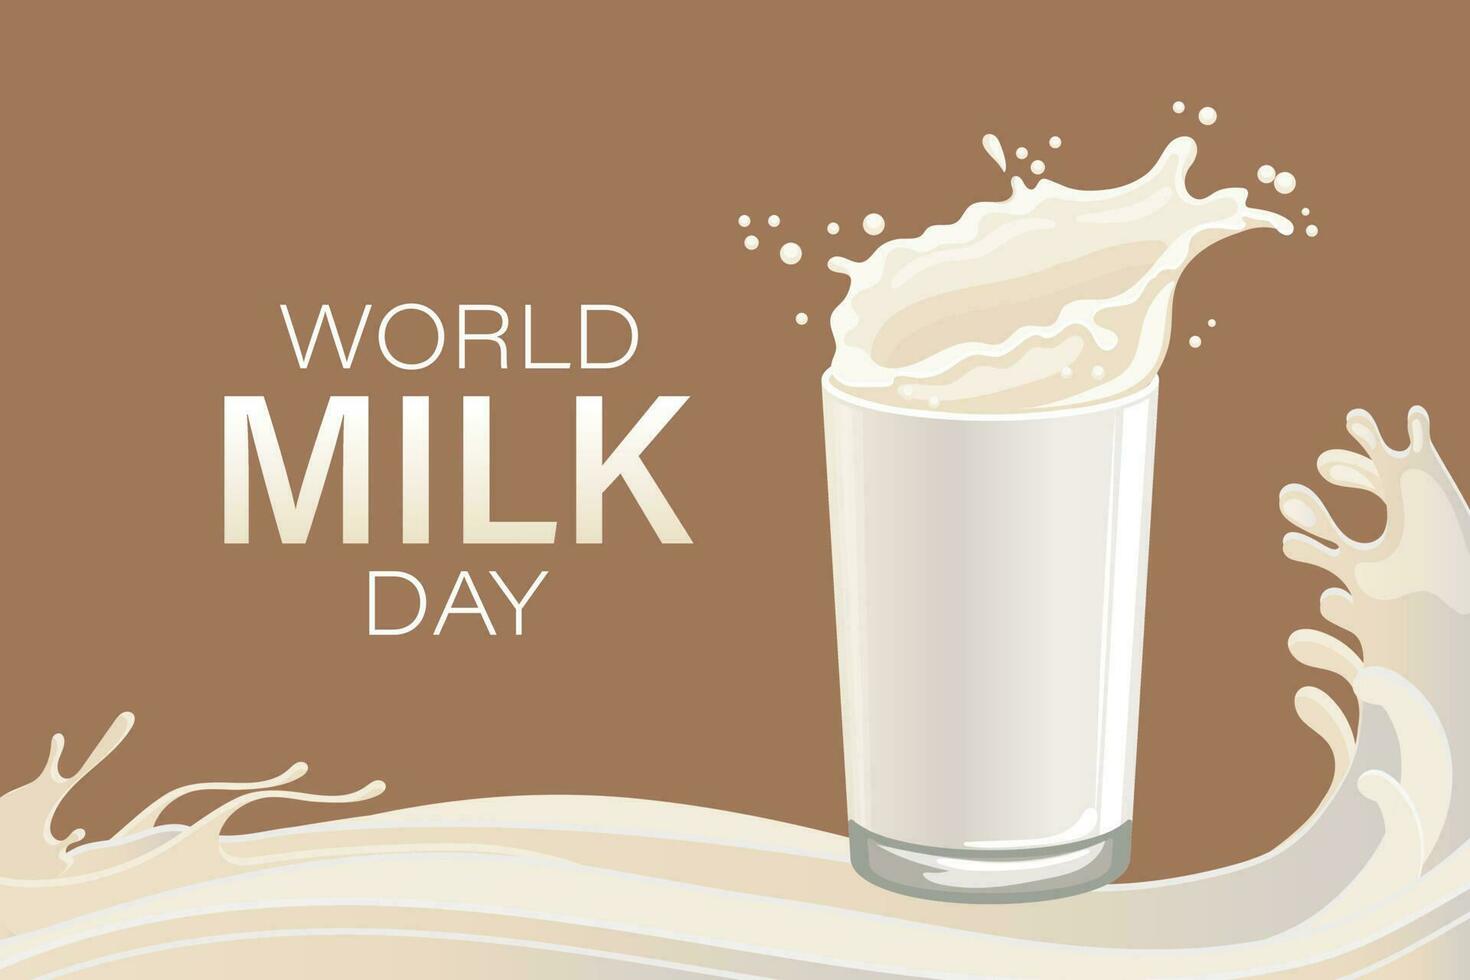 World Milk Day, banner. Glass with milk splash and text. Poster, illustration, vector